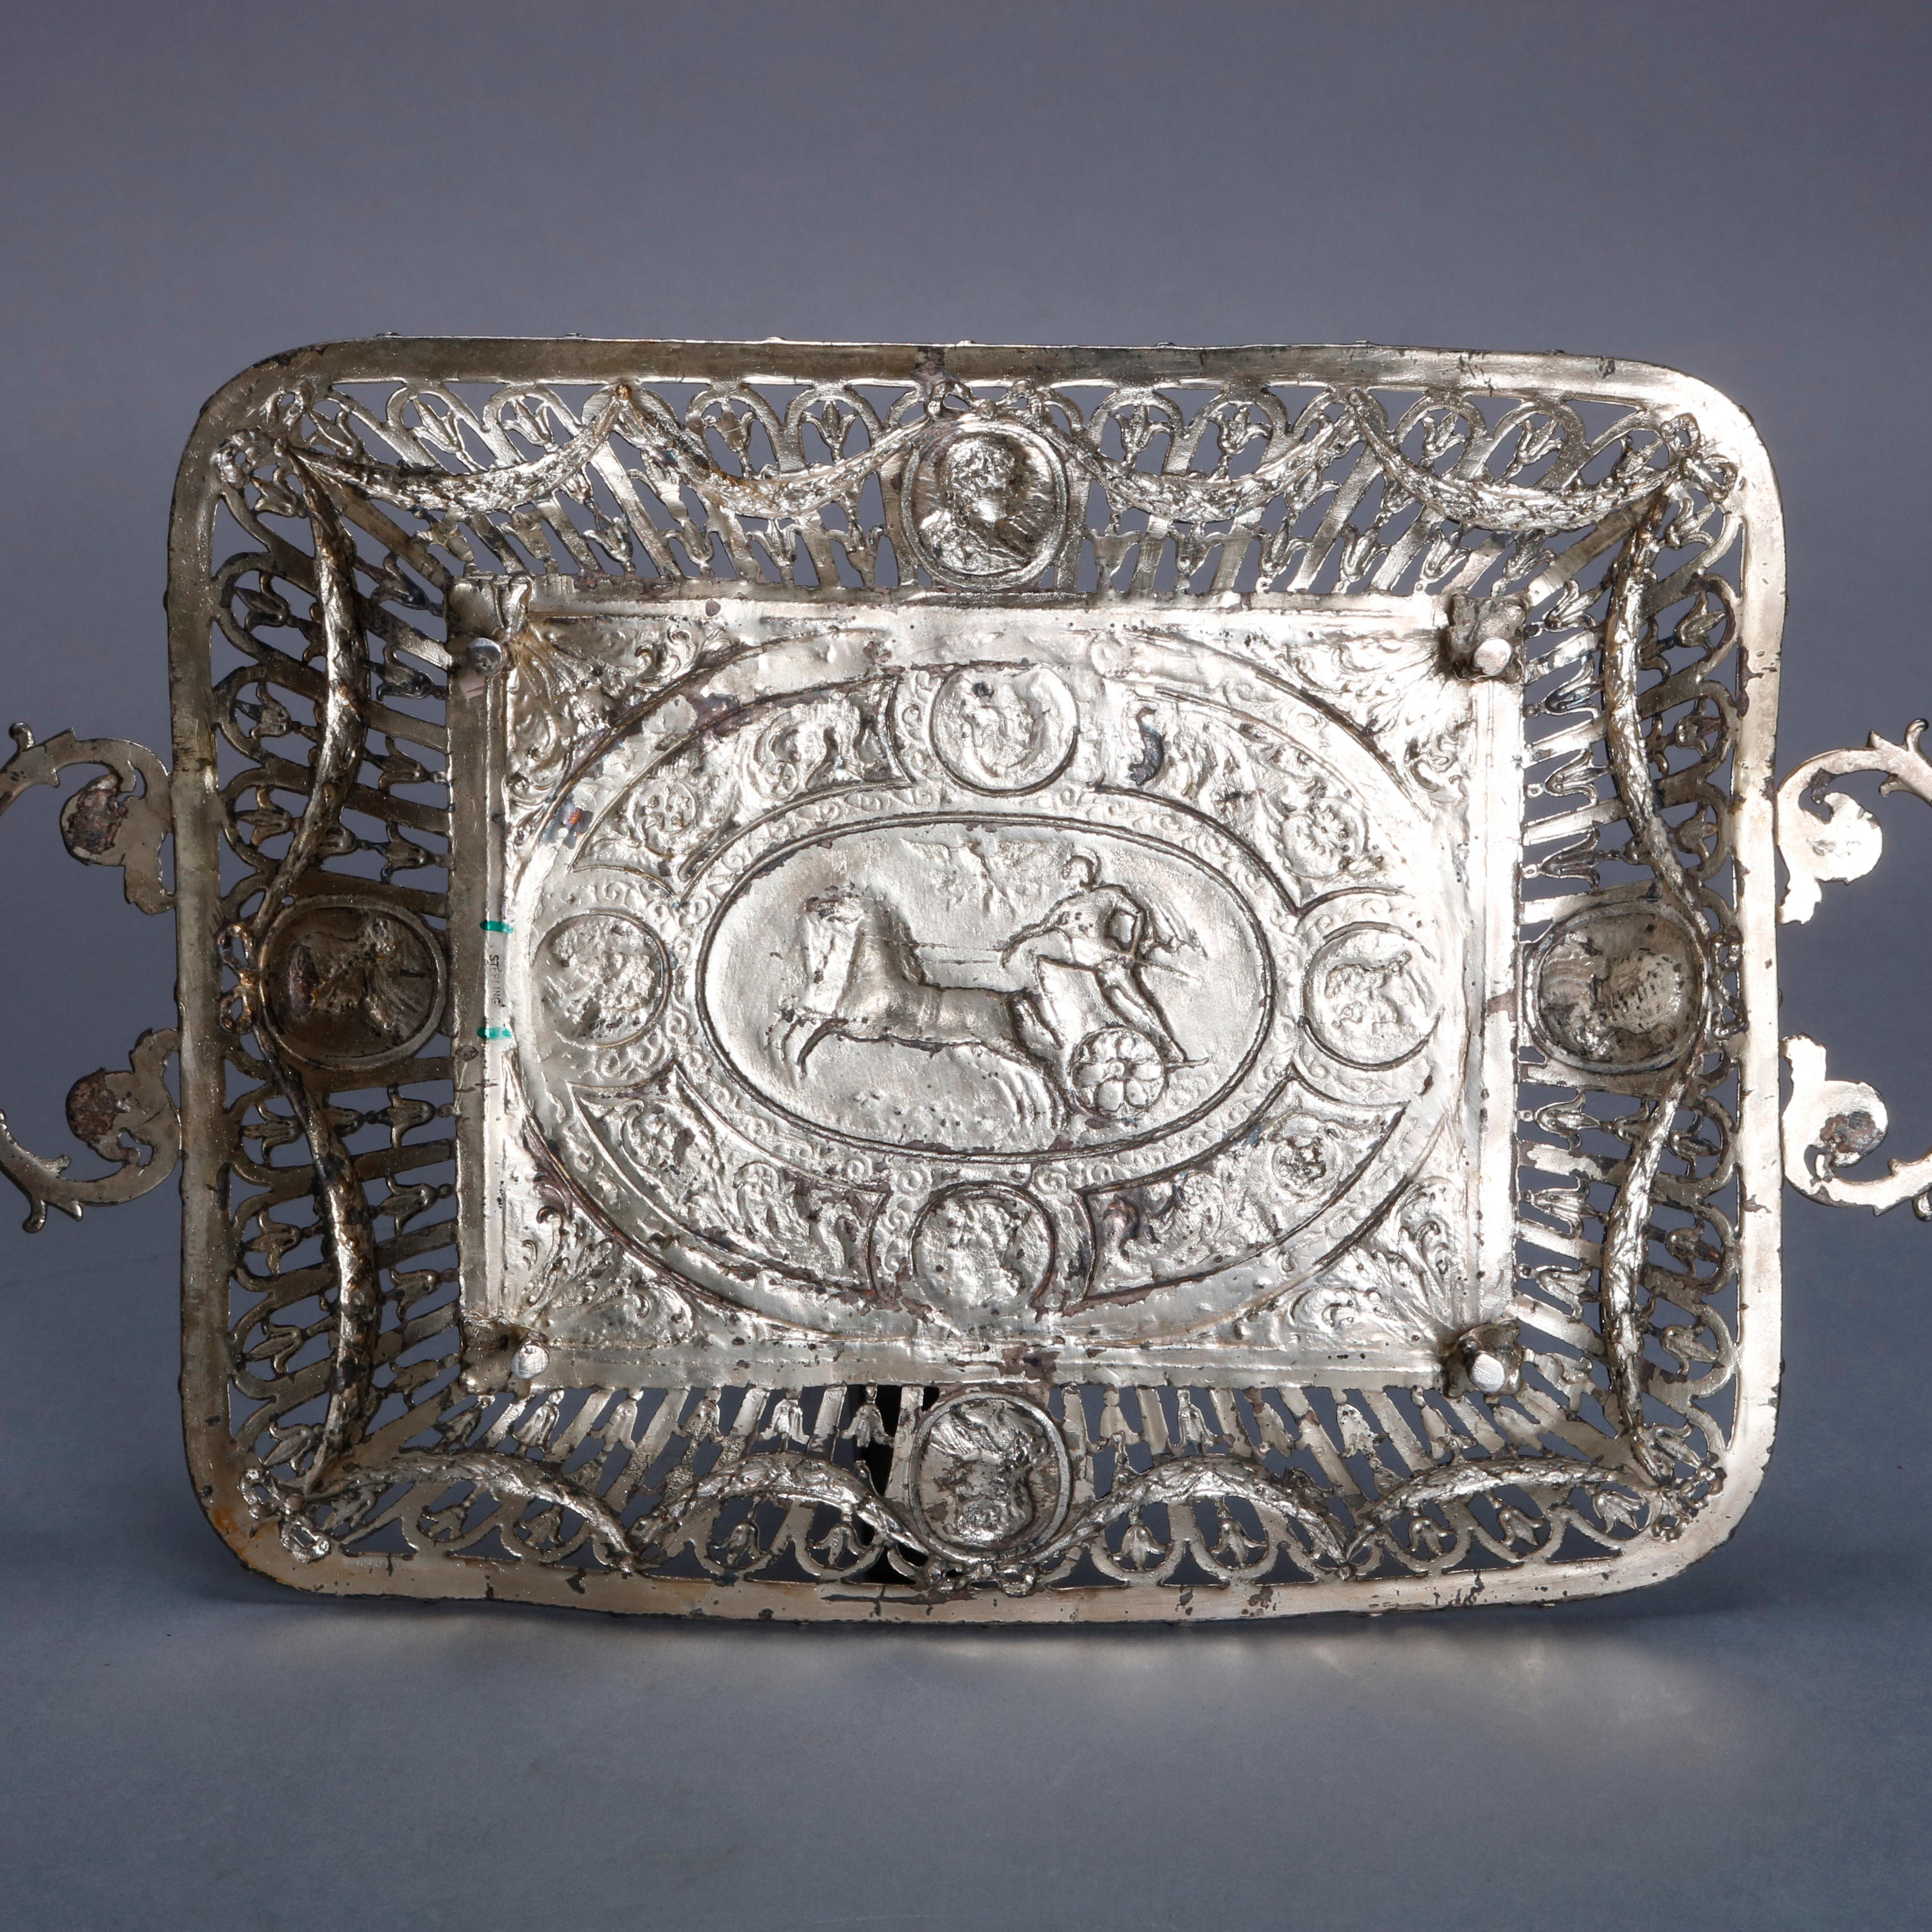 An antique neoclassical double handled tray offers sterling silver construction with central high relief medallion depicting Roman Warrior on his horse draw chariot in countryside setting, pierced sides with stylized floral elements, cameos and